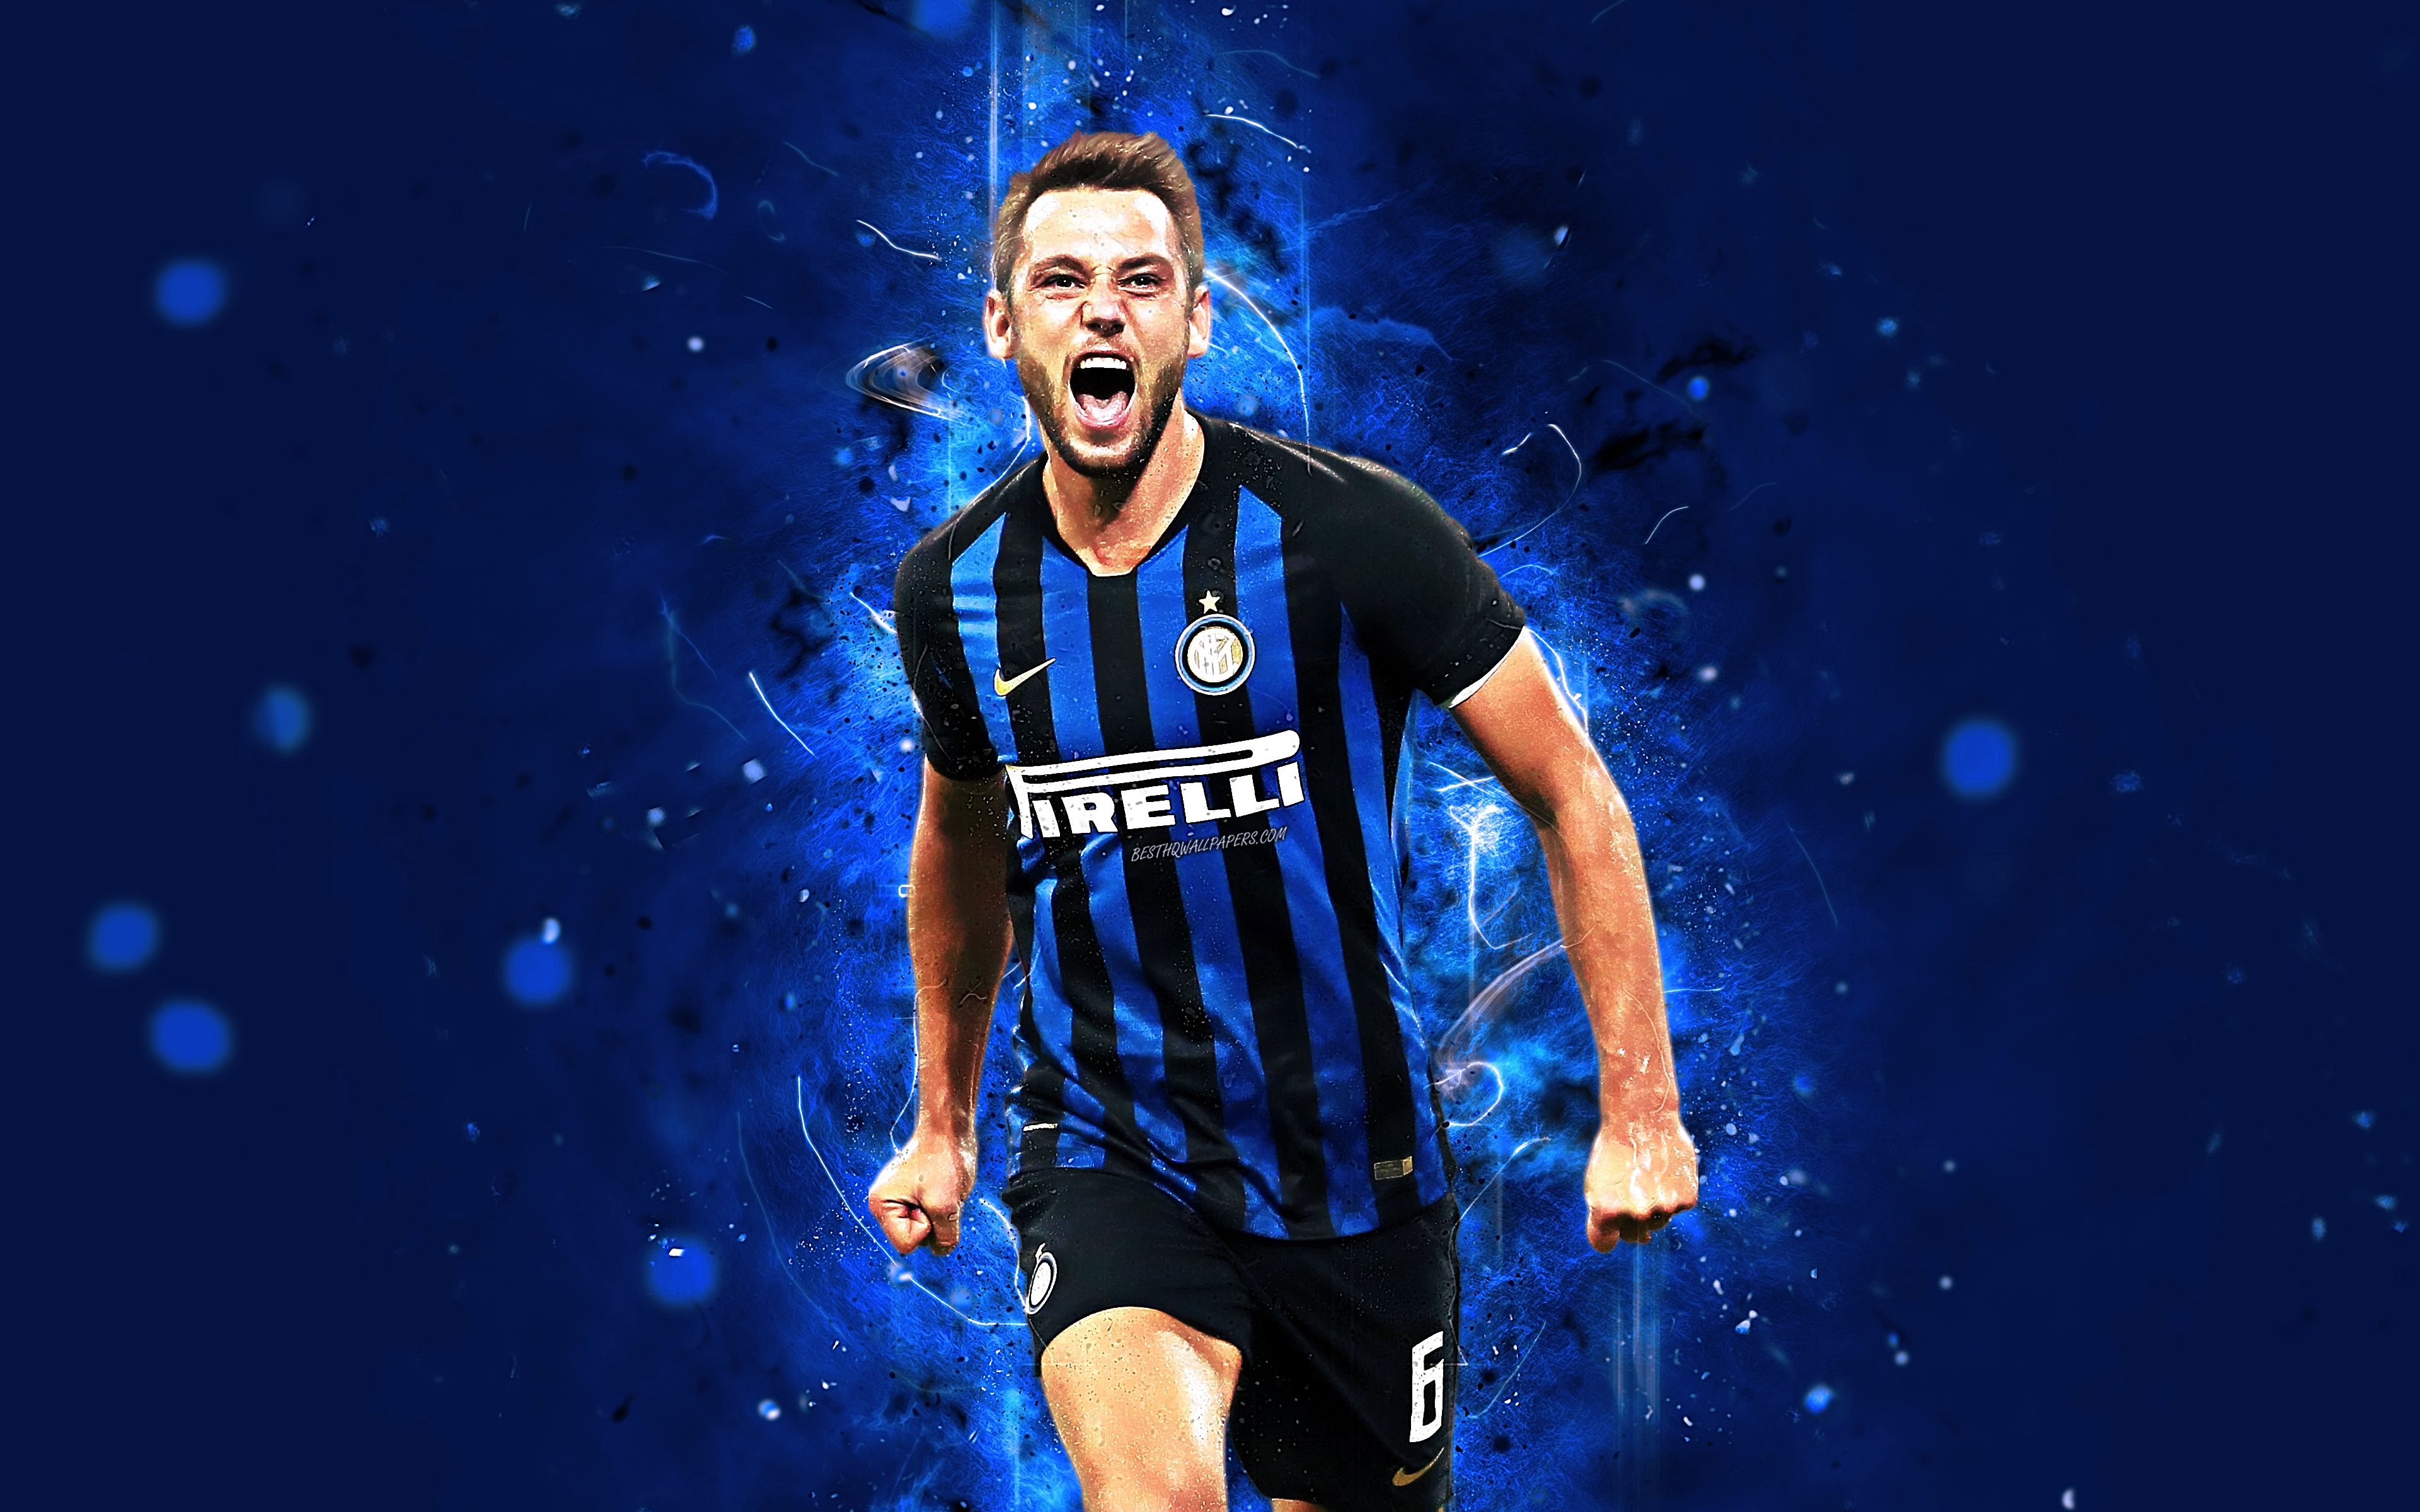 Inter De Milan Wallpaper HD / Diego Milito Inter De Milan Wallpaper Diego Milito Wallpaper 39267531 Fanpop collection of the inter milan wallpaper and background available for download